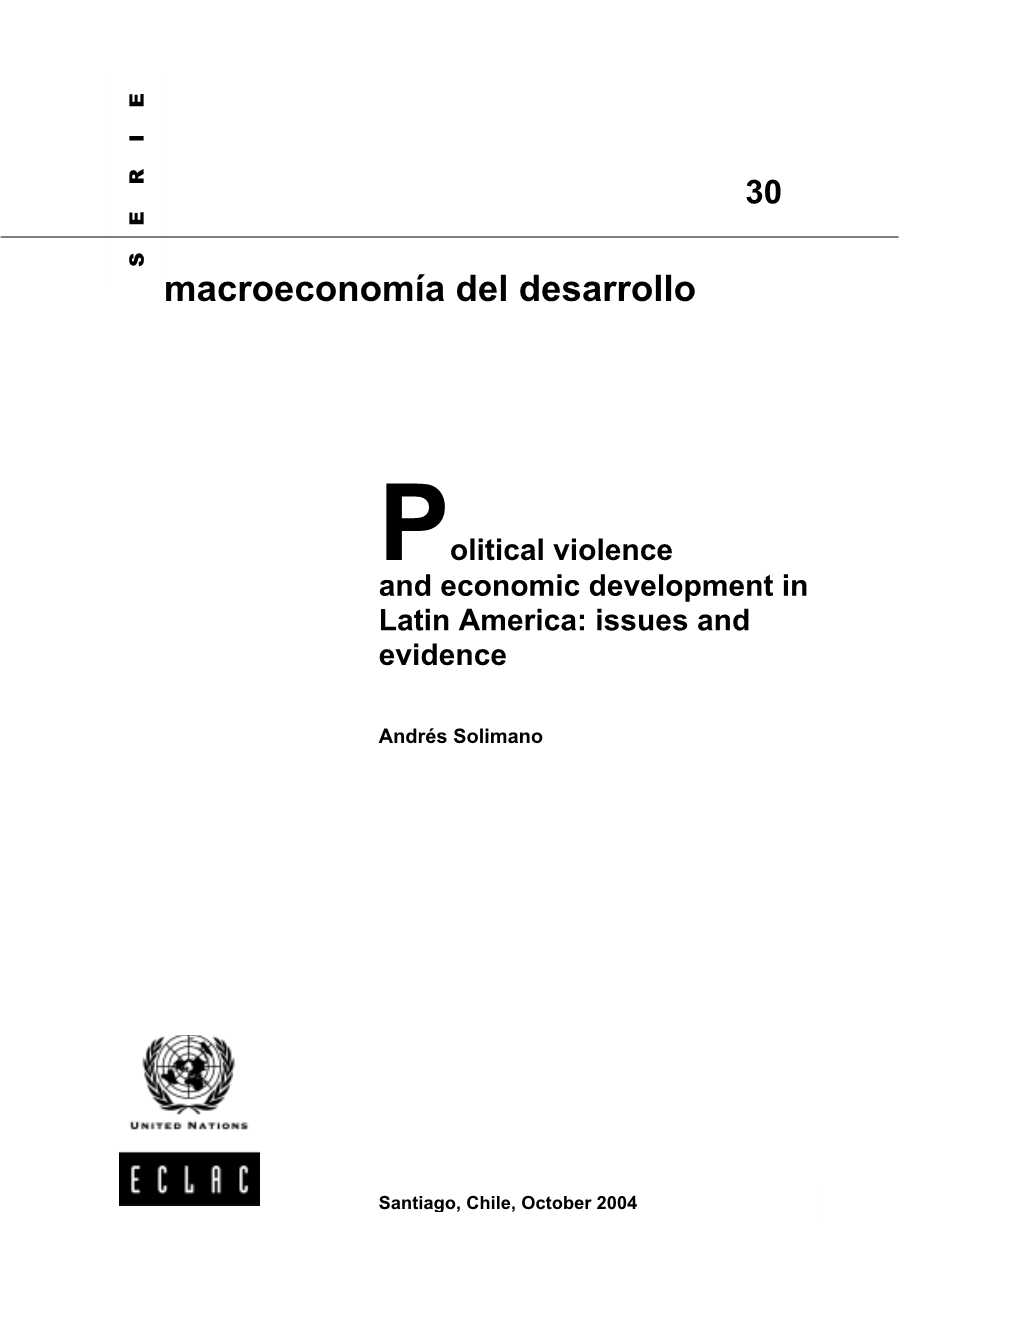 Political Violence and Economic Development in Latin America: Issues and Evidence